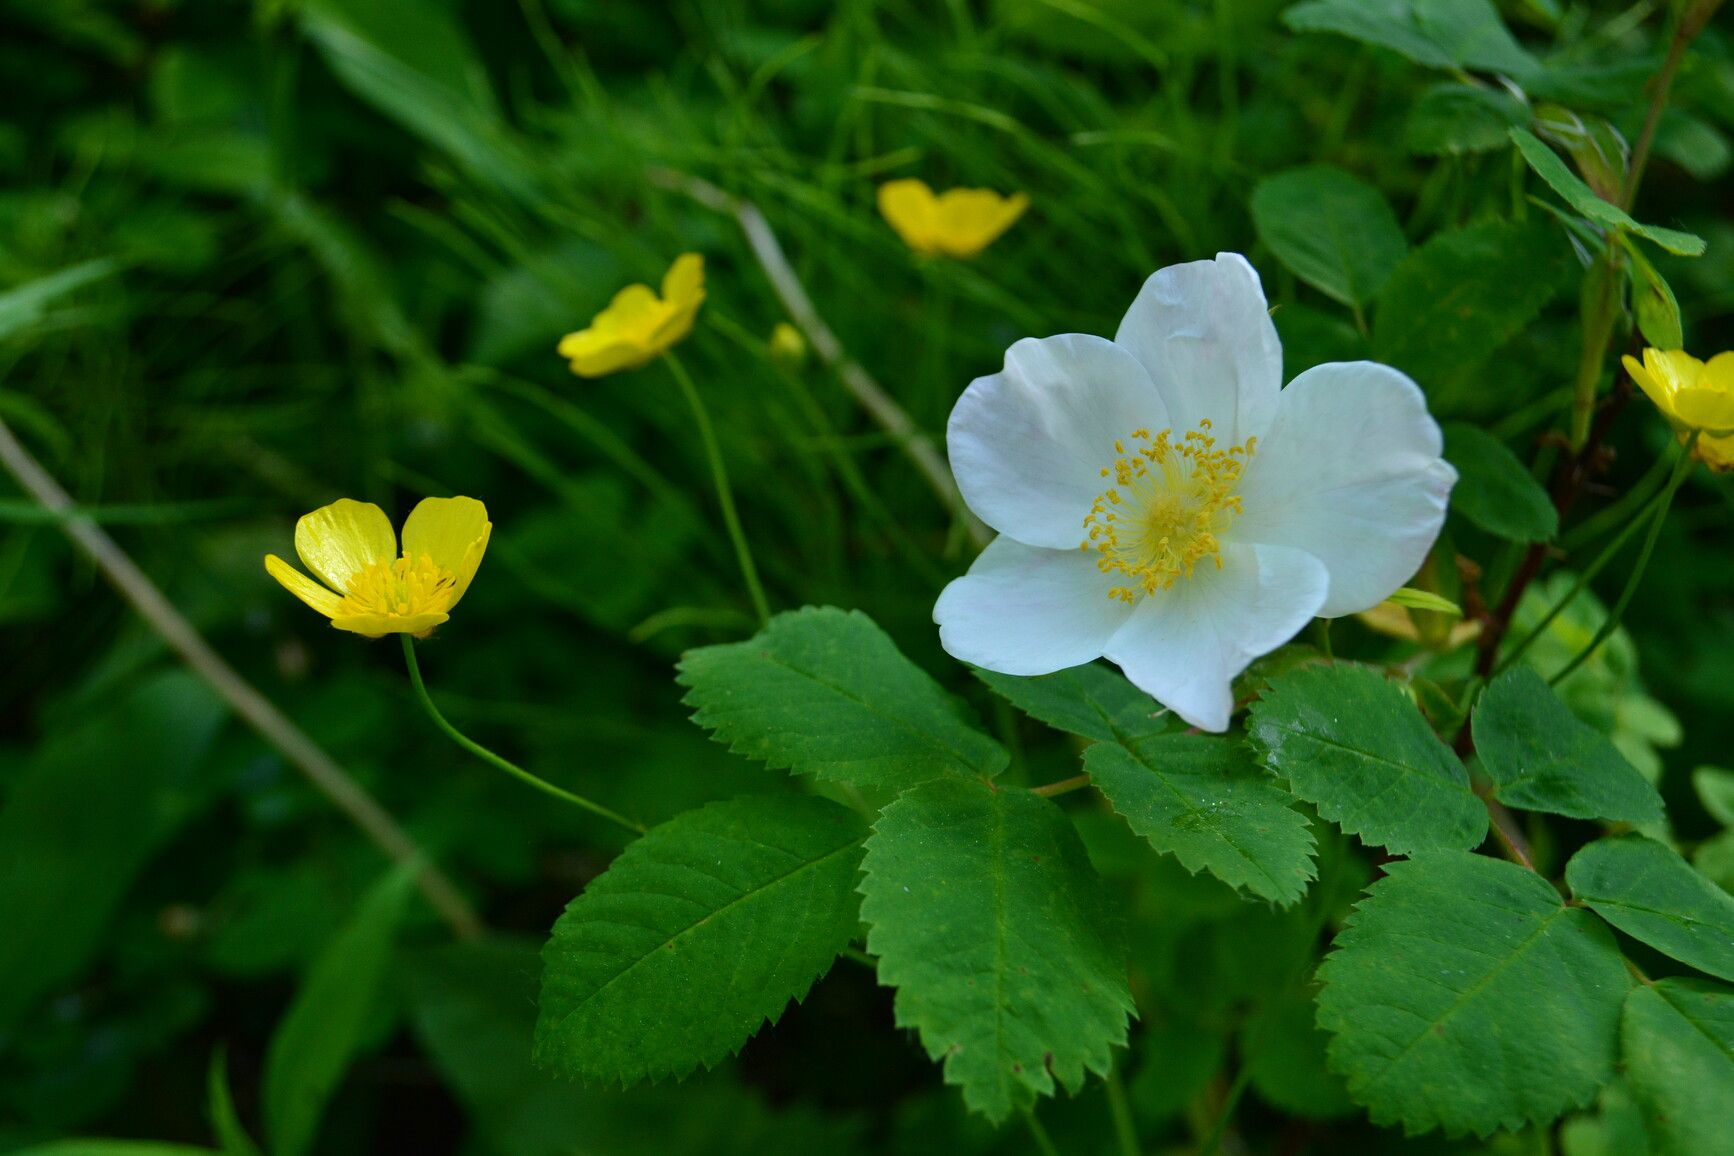 Burnet rose and meadow butter cup flowering in Mount Fernie Park.